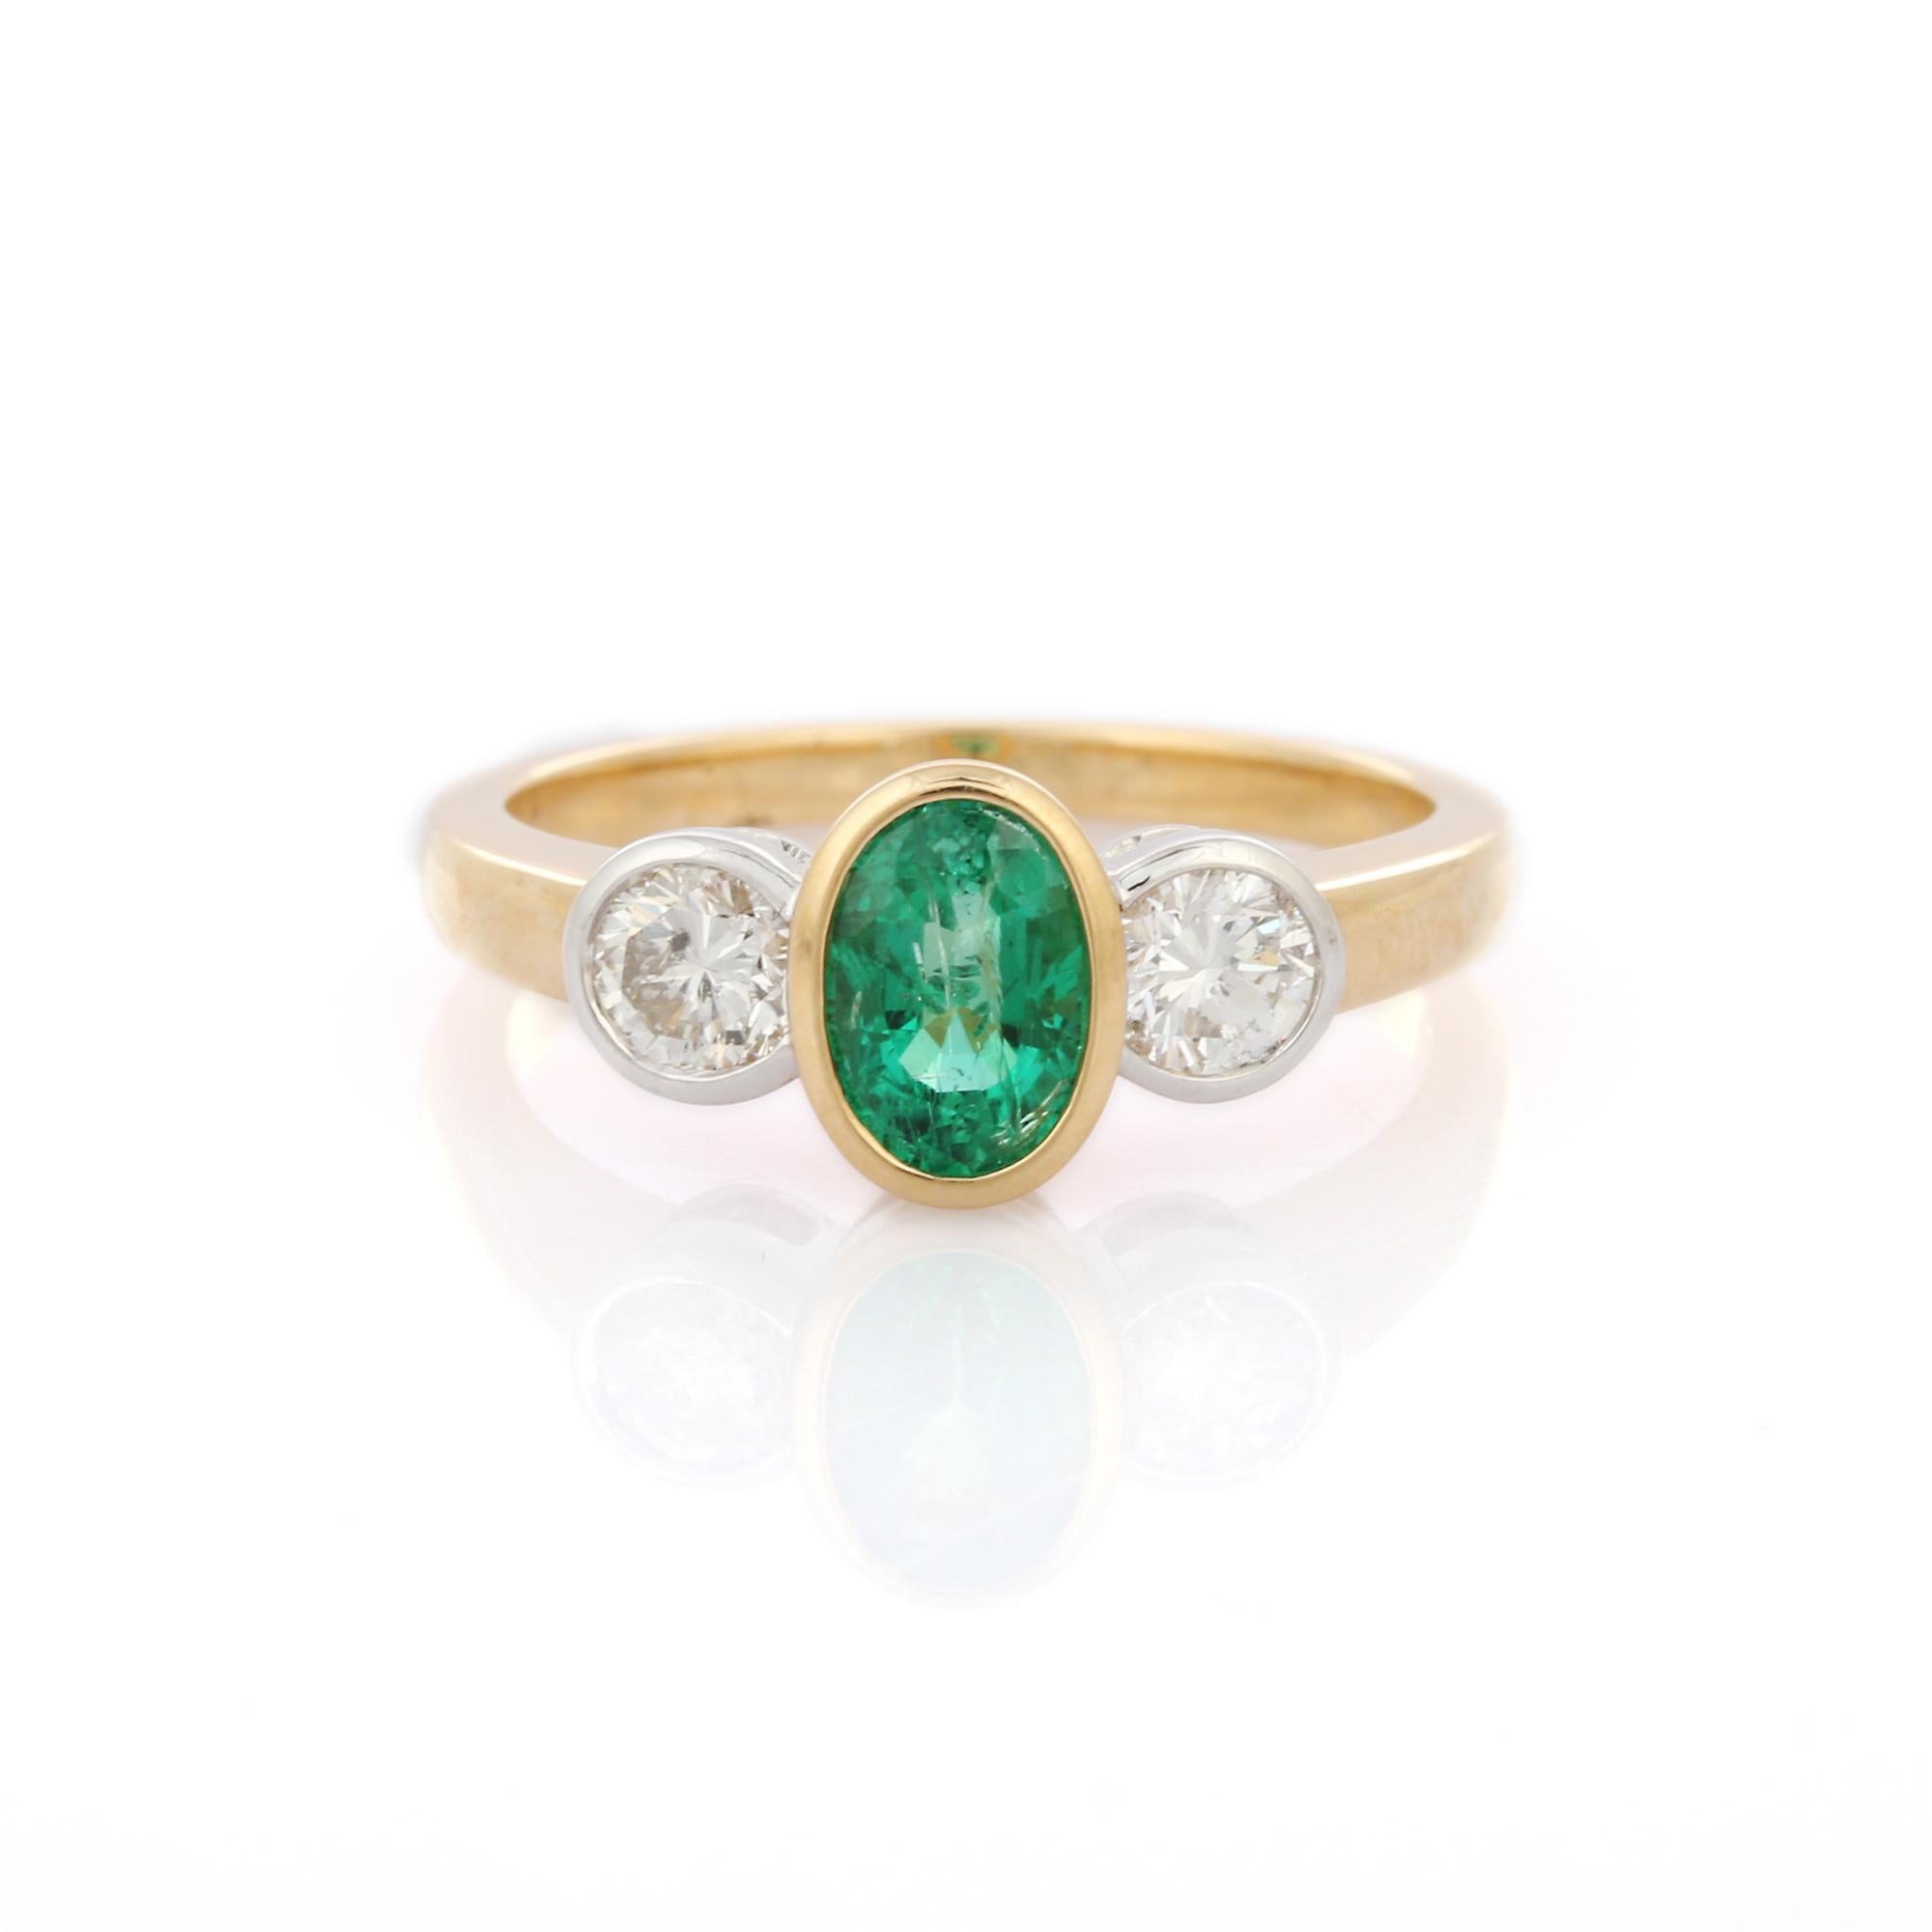 For Sale:  18K Solid Yellow Gold Bezel Set Oval Cut Emerald and Diamond Three Stone Ring  2